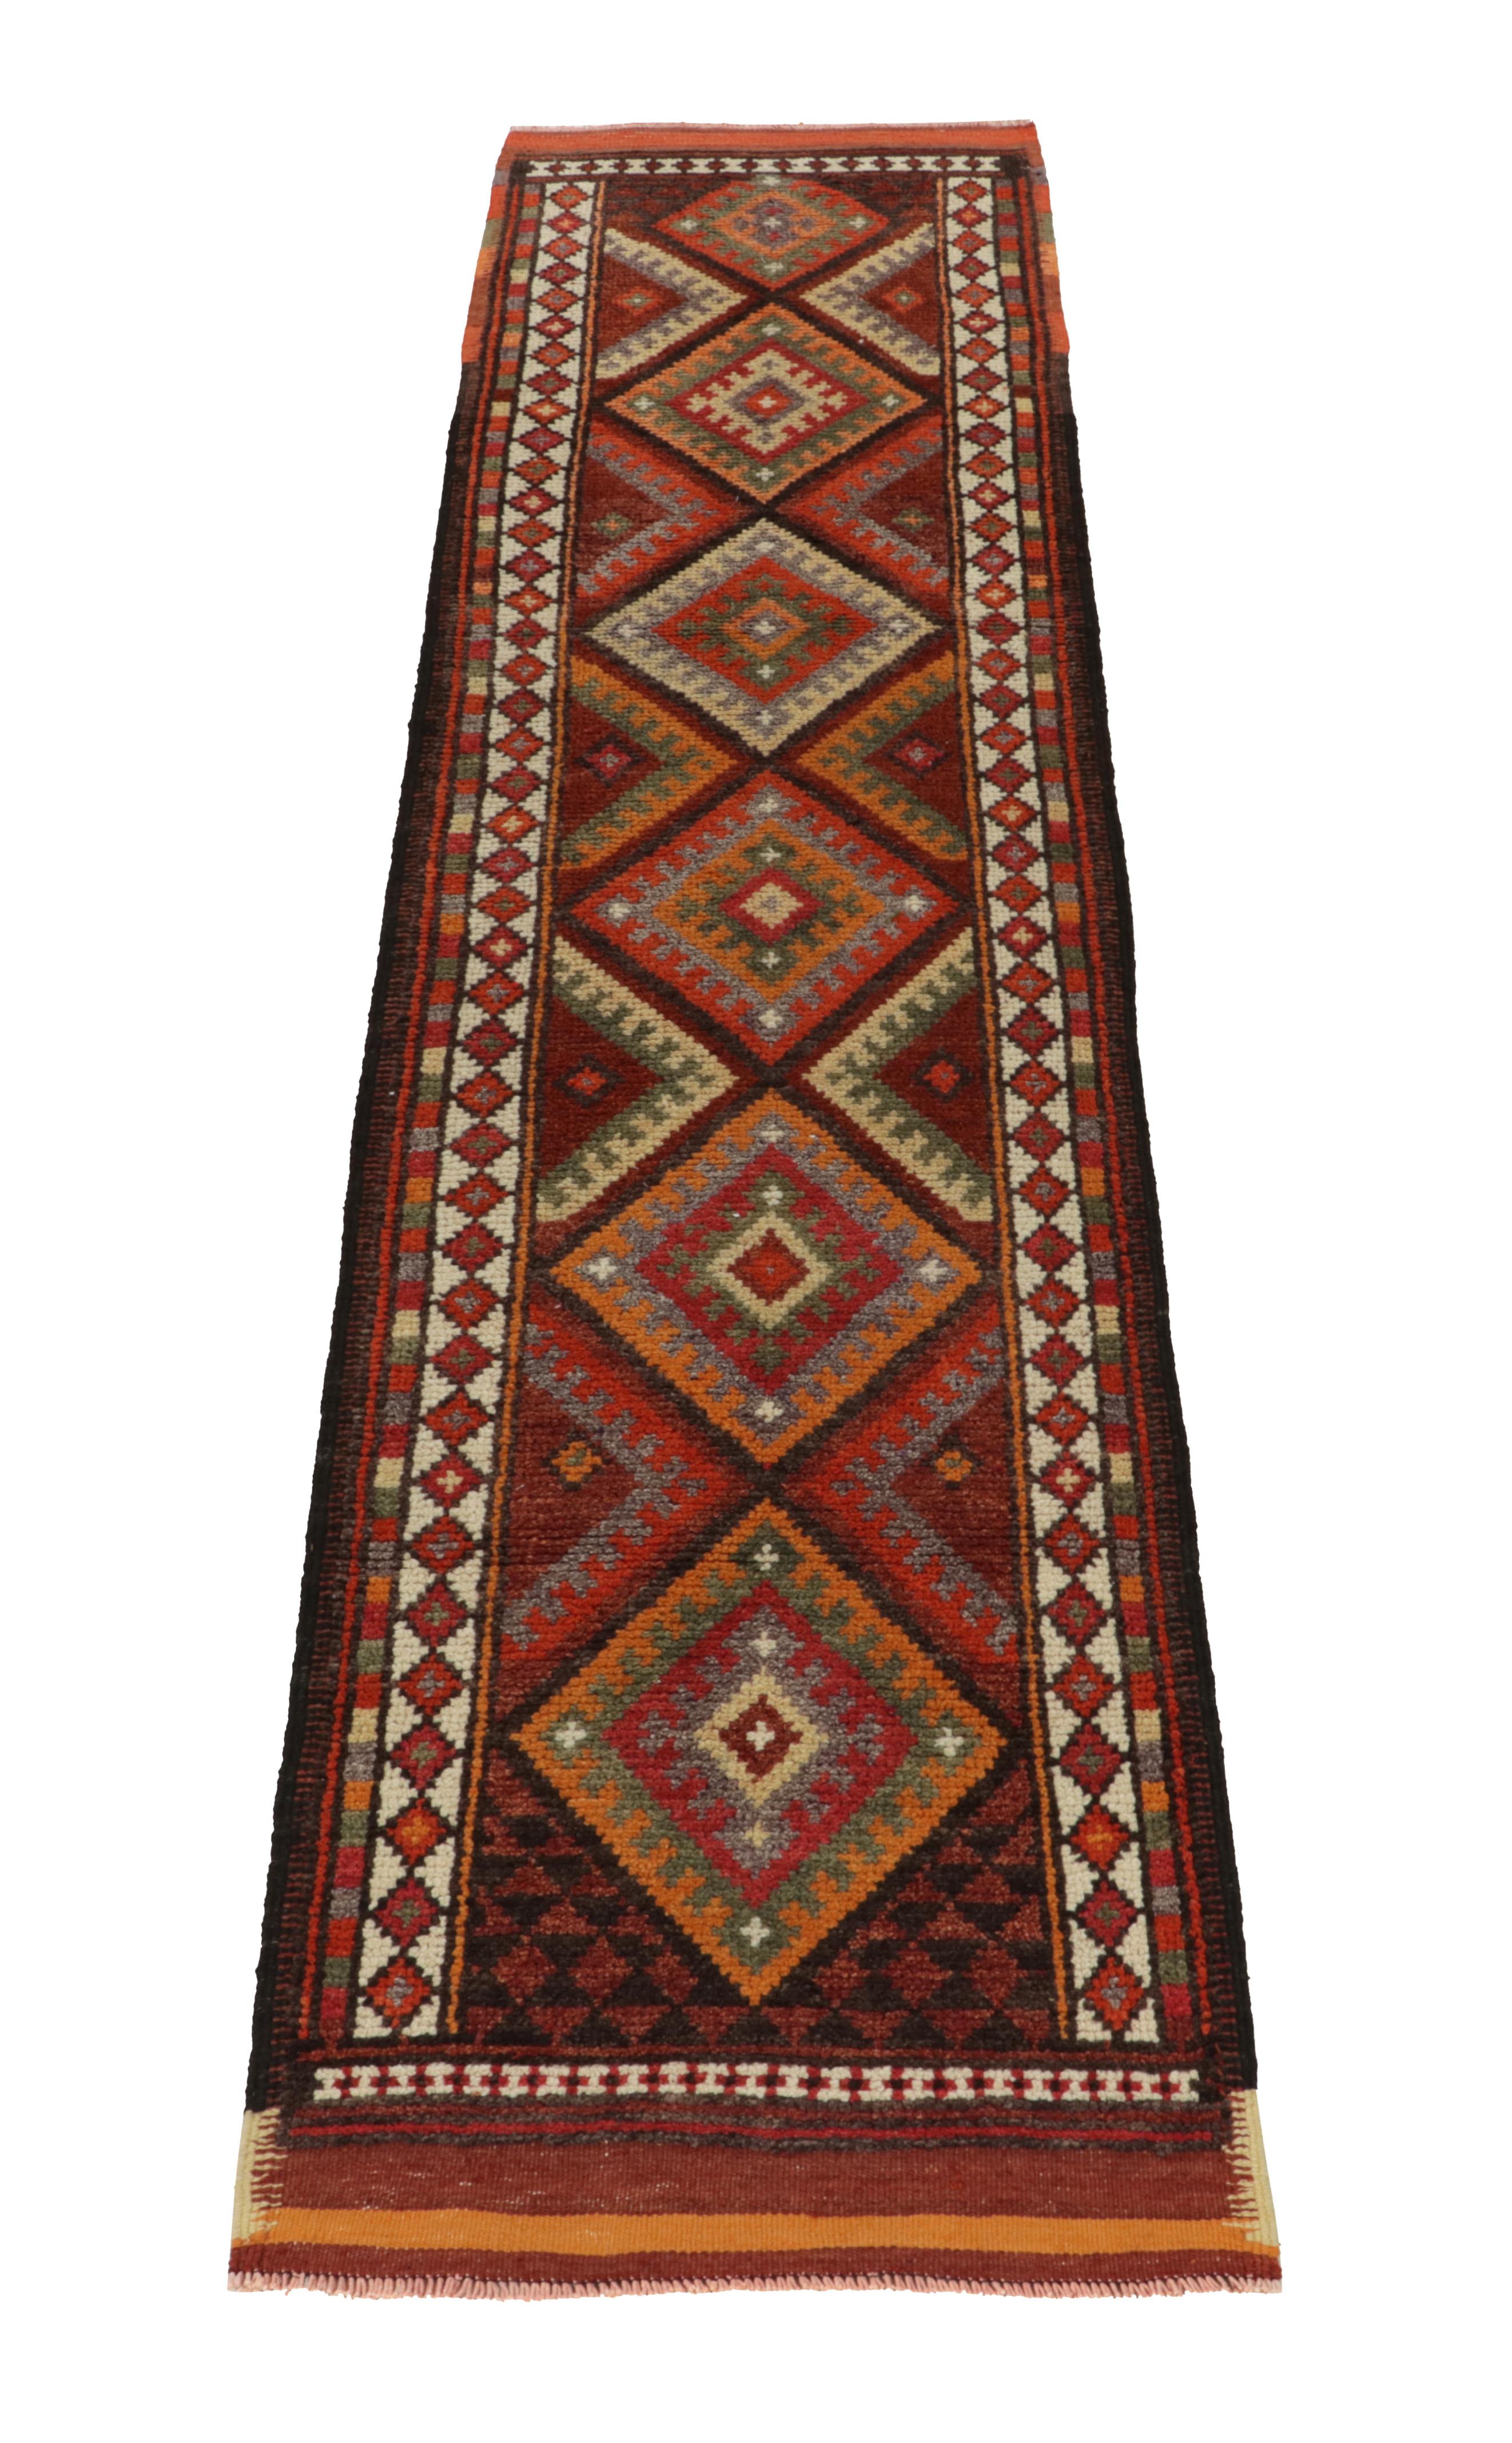 Hand-knotted in wool, a 3x12 runner from Rug & Kilim’s latest curation of rare, vibrant tribal rugs. 

Originating from Turkey circa 1950-1960, the design relishes a symmetric diamond pattern in rich orange, red, blue, green & black of